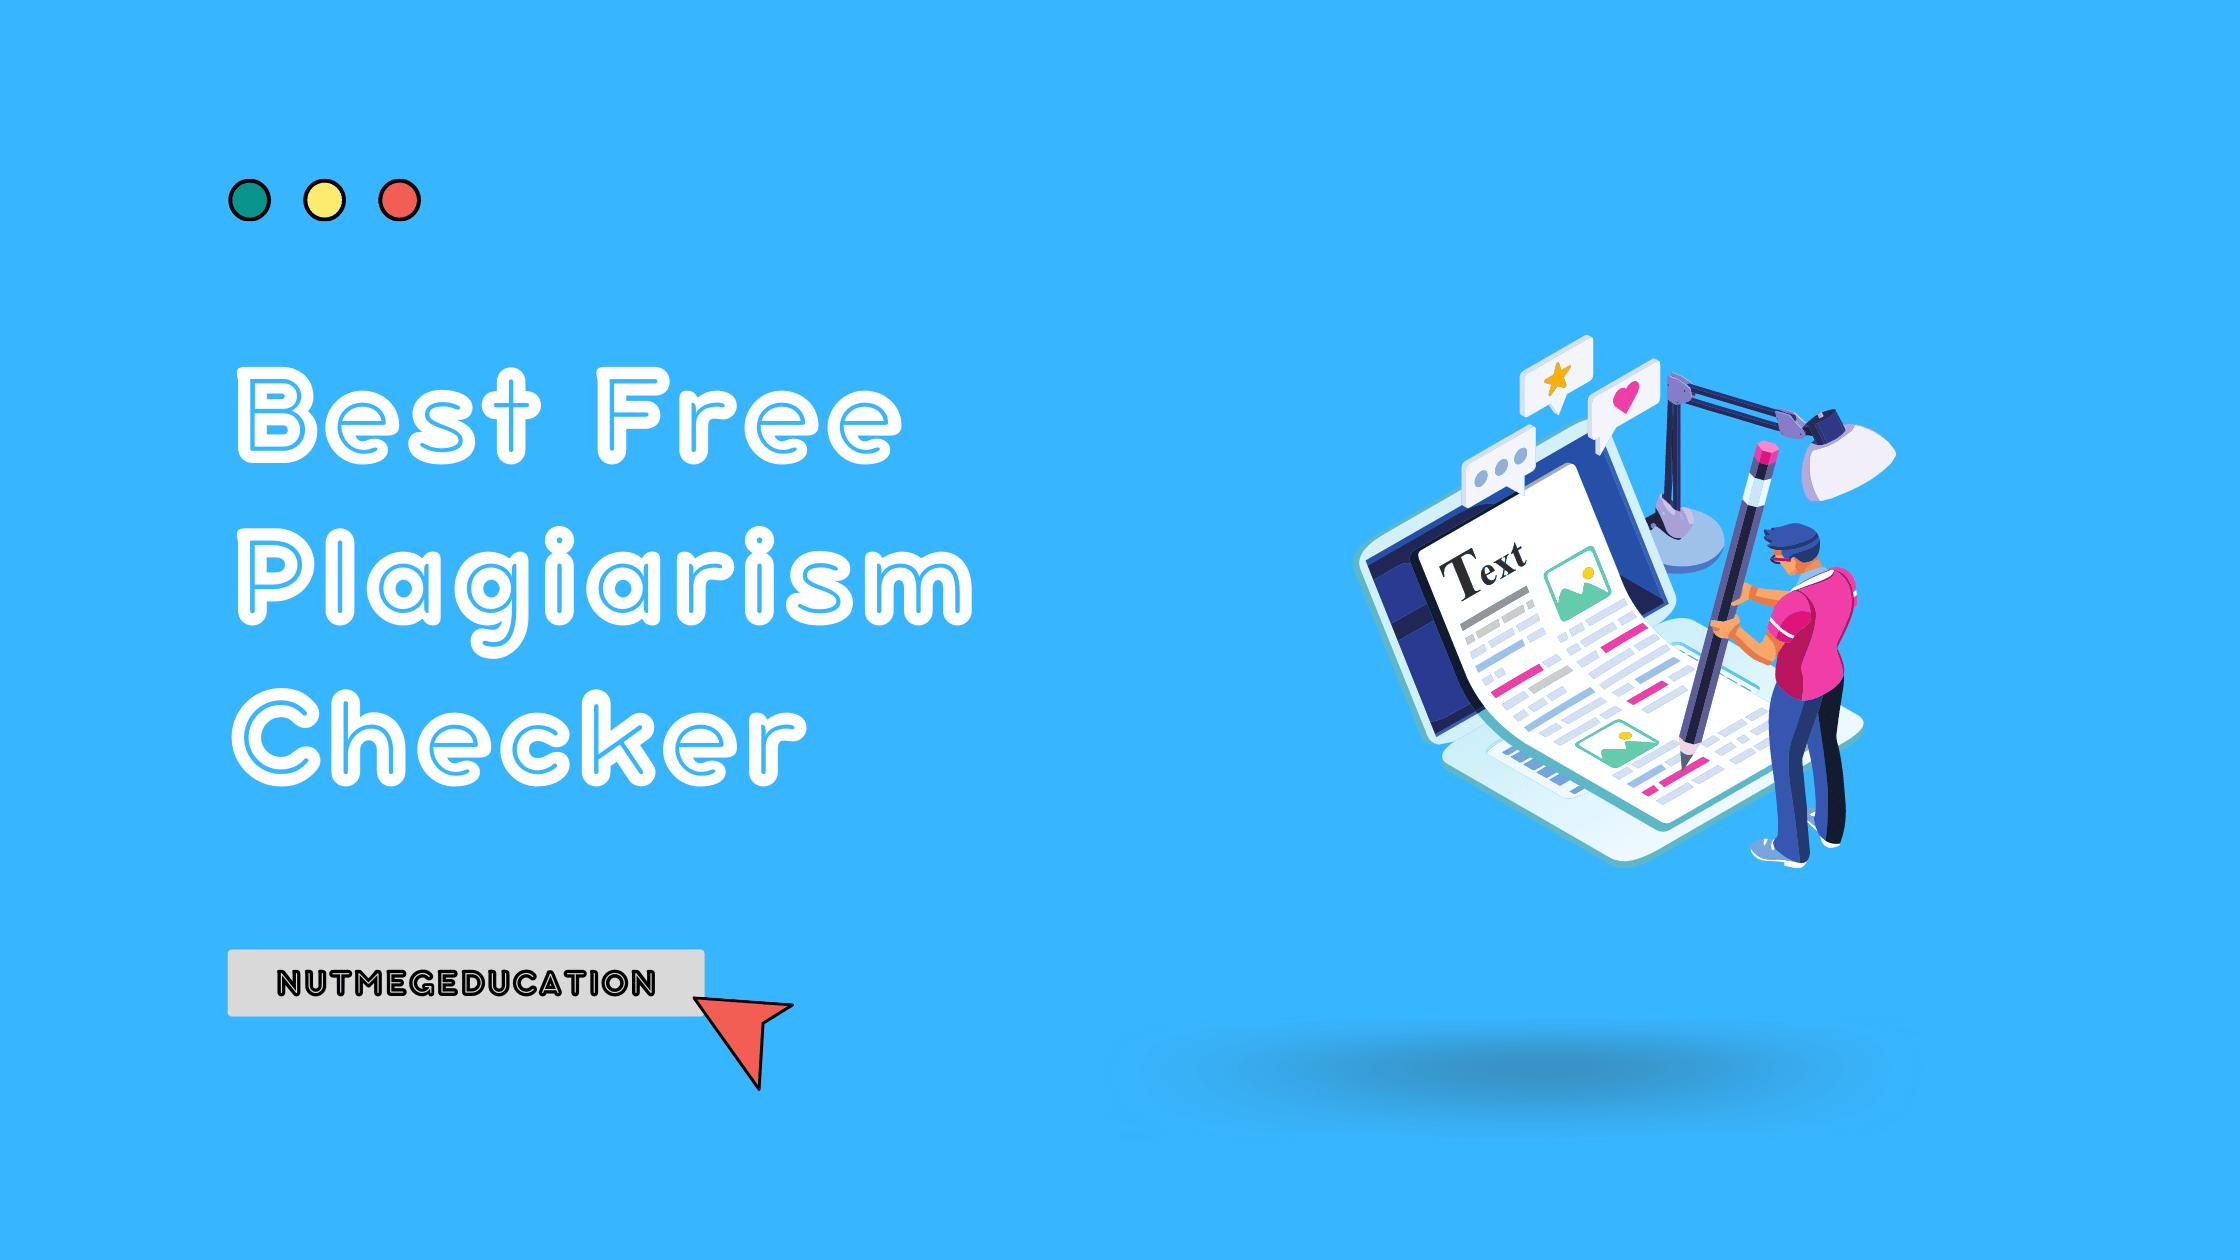 Best Free Plagiarism Checker - NutMegEducation